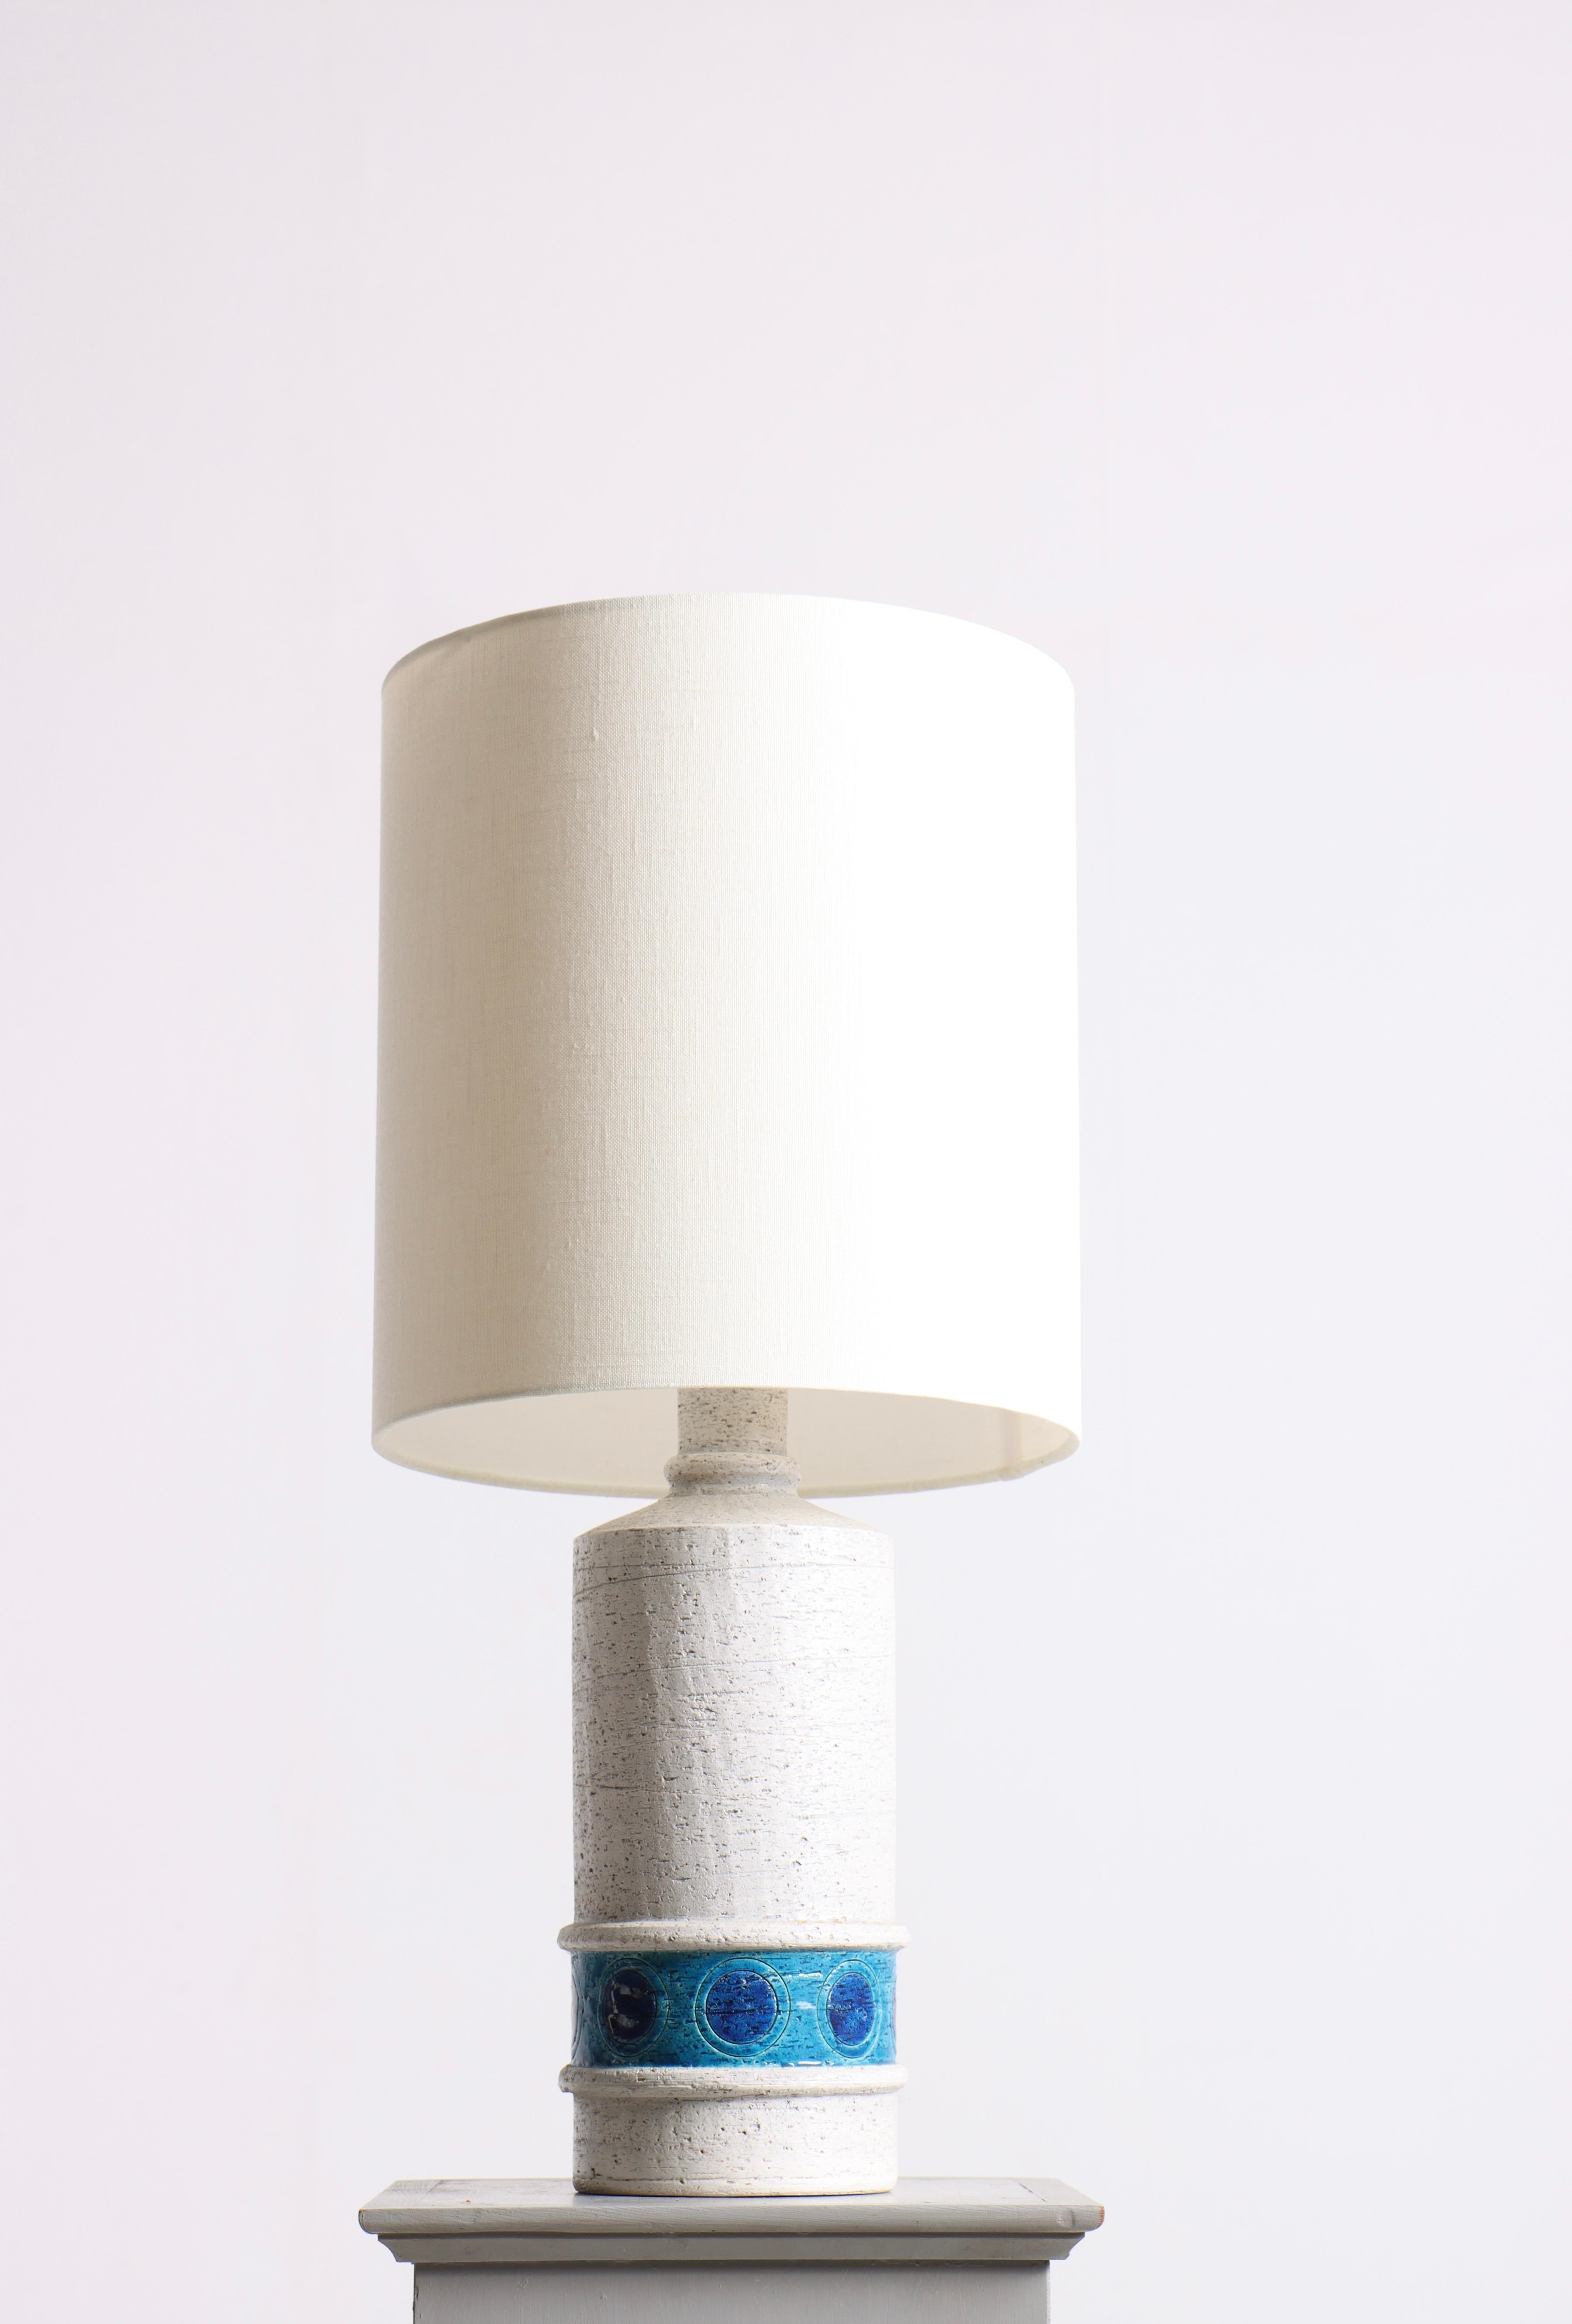 Table lamp in ceramic, designed by Aldo Londi and made by Bitossi, made in Italy in the 1960s. Great original condition.